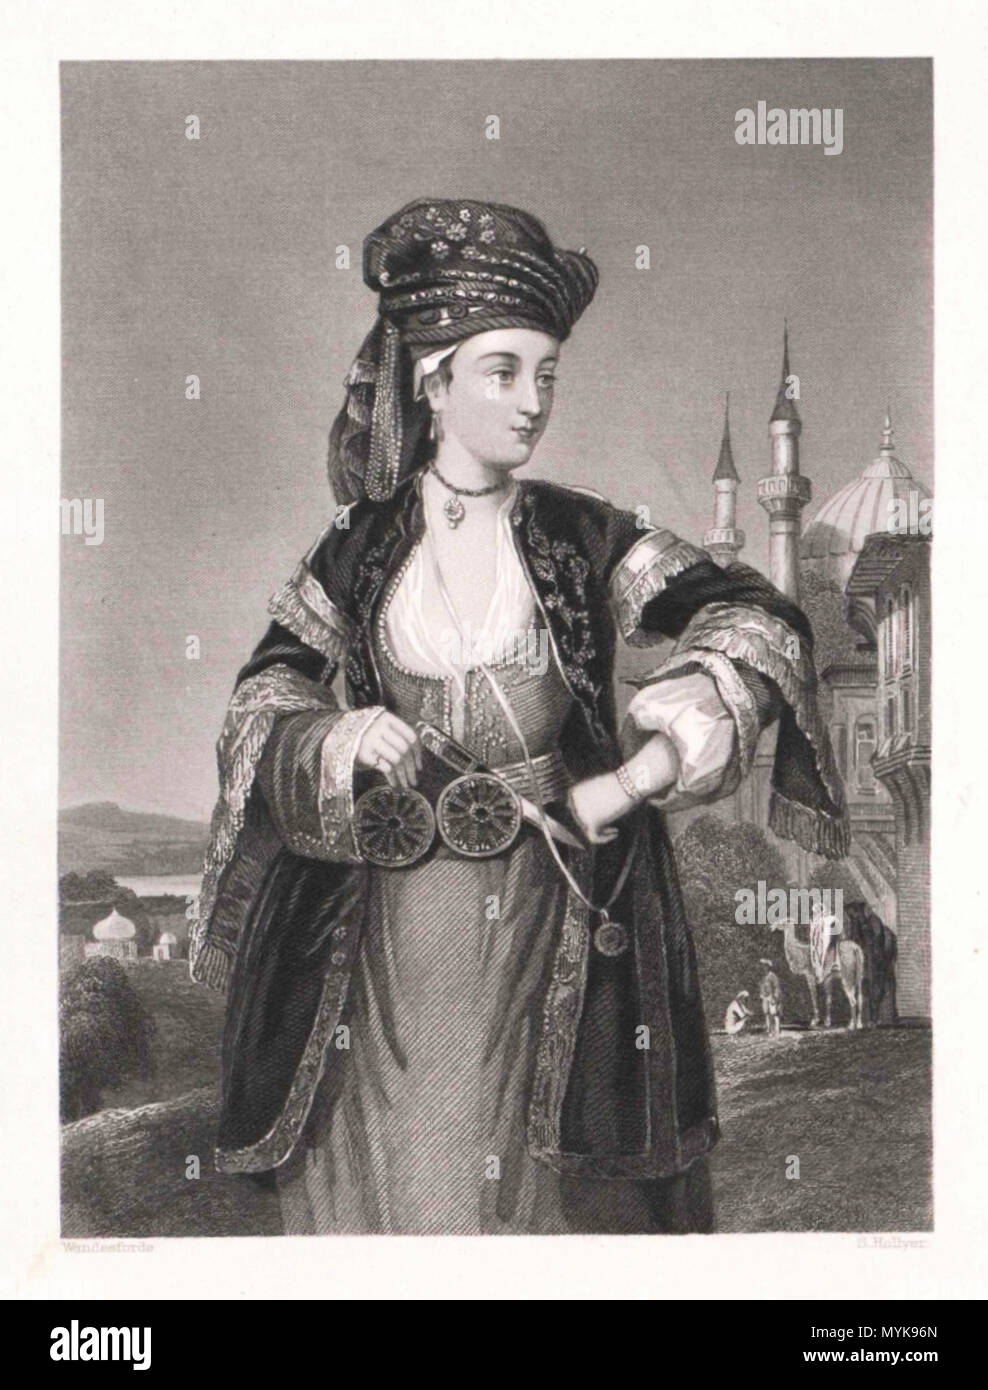 . Mary Wortley Montagu (1789-1762). New York : Derby & Jackson . 19e siècle 353 Mary Wortley Montague Banque D'Images